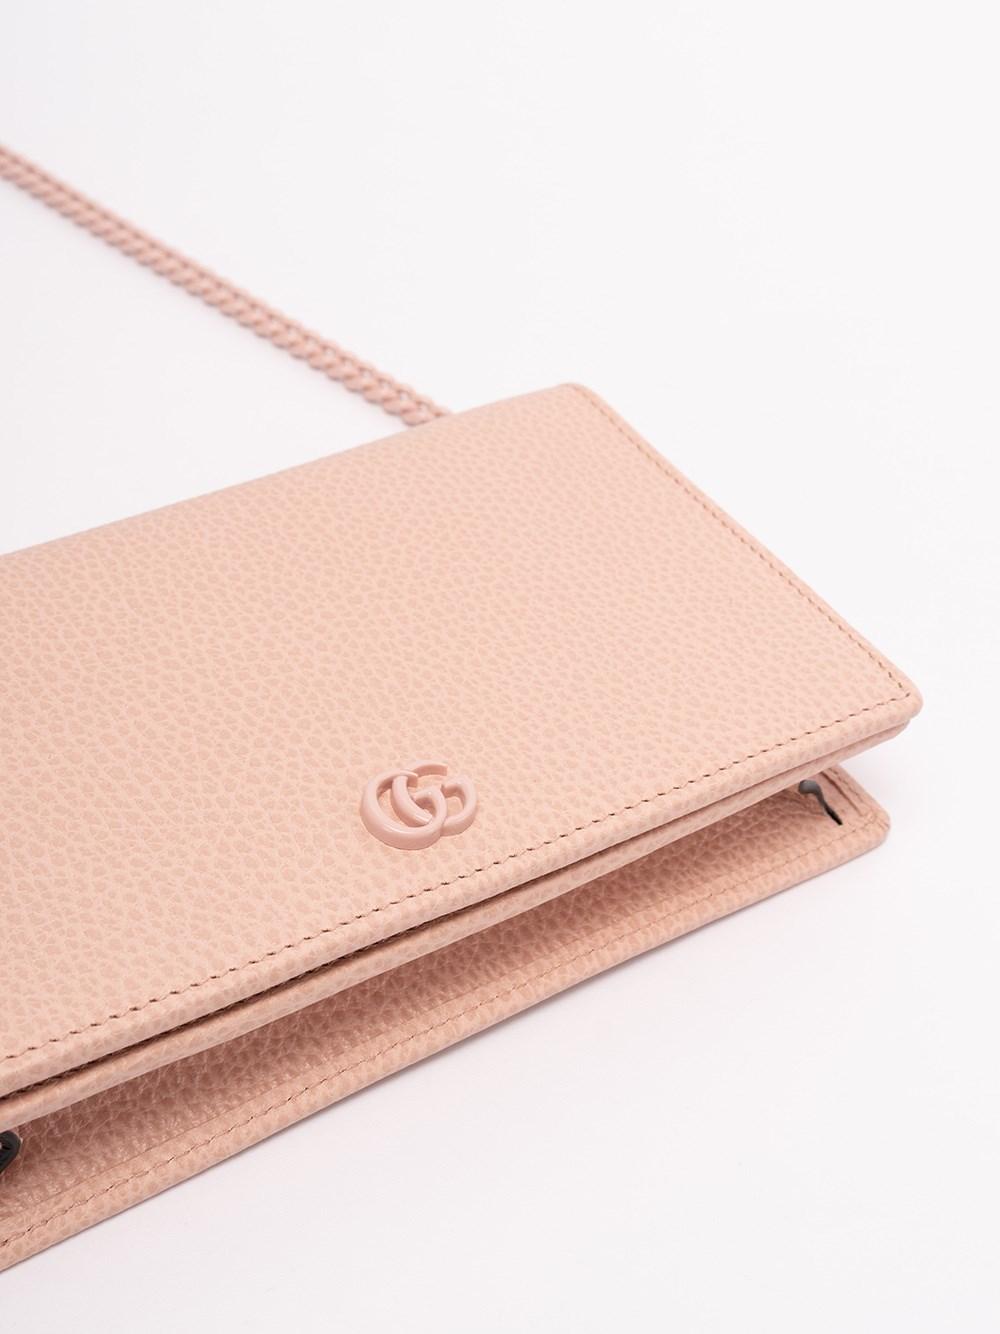 GG Marmont mini chain bag in Pink Leather